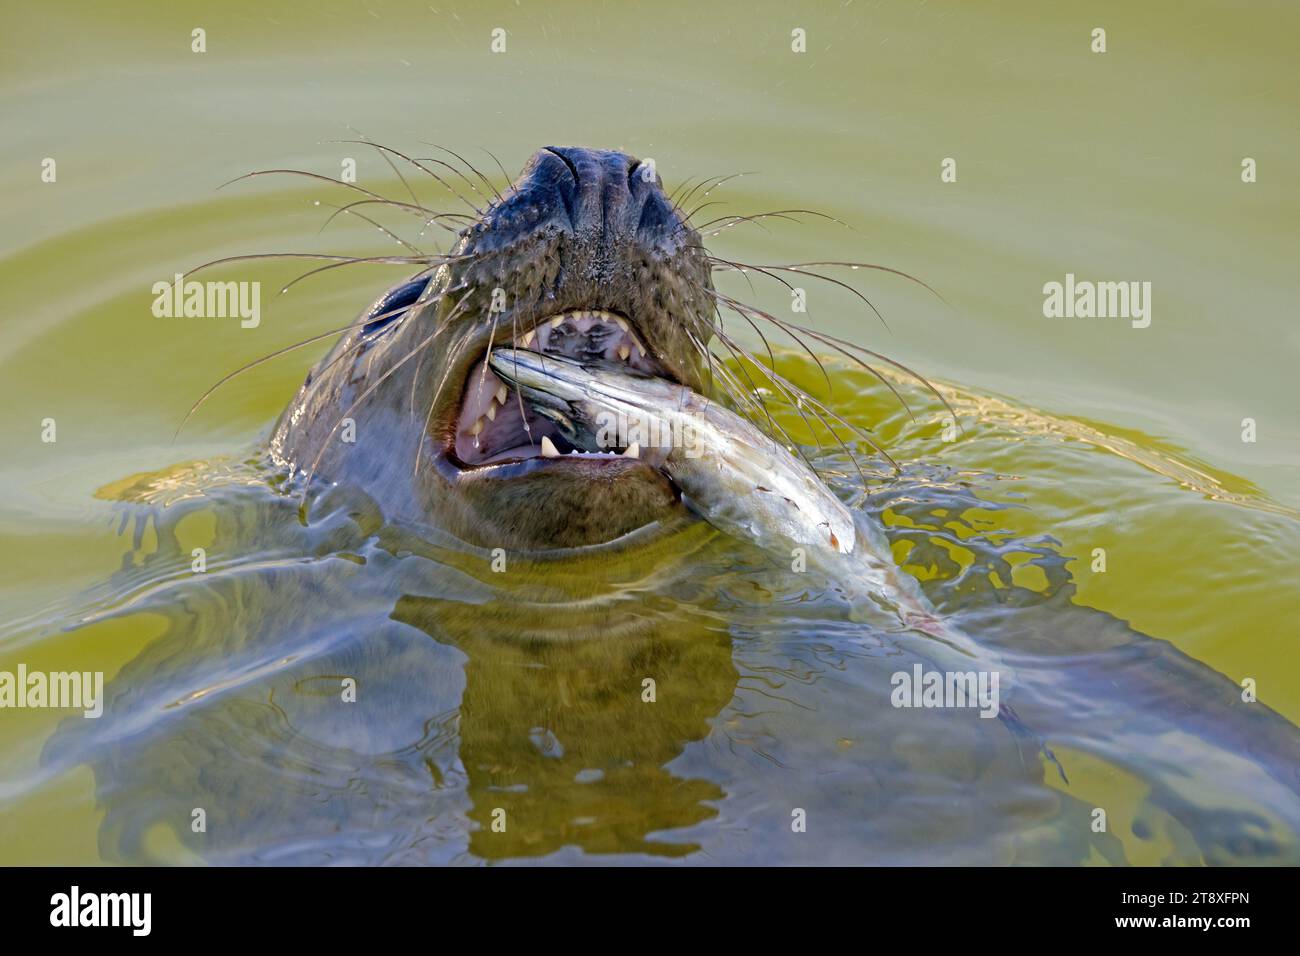 Close-up of grey seal / gray seal (Halichoerus grypus) eating mackerel (Scomber scombrus) in water along the North Sea coast Stock Photo